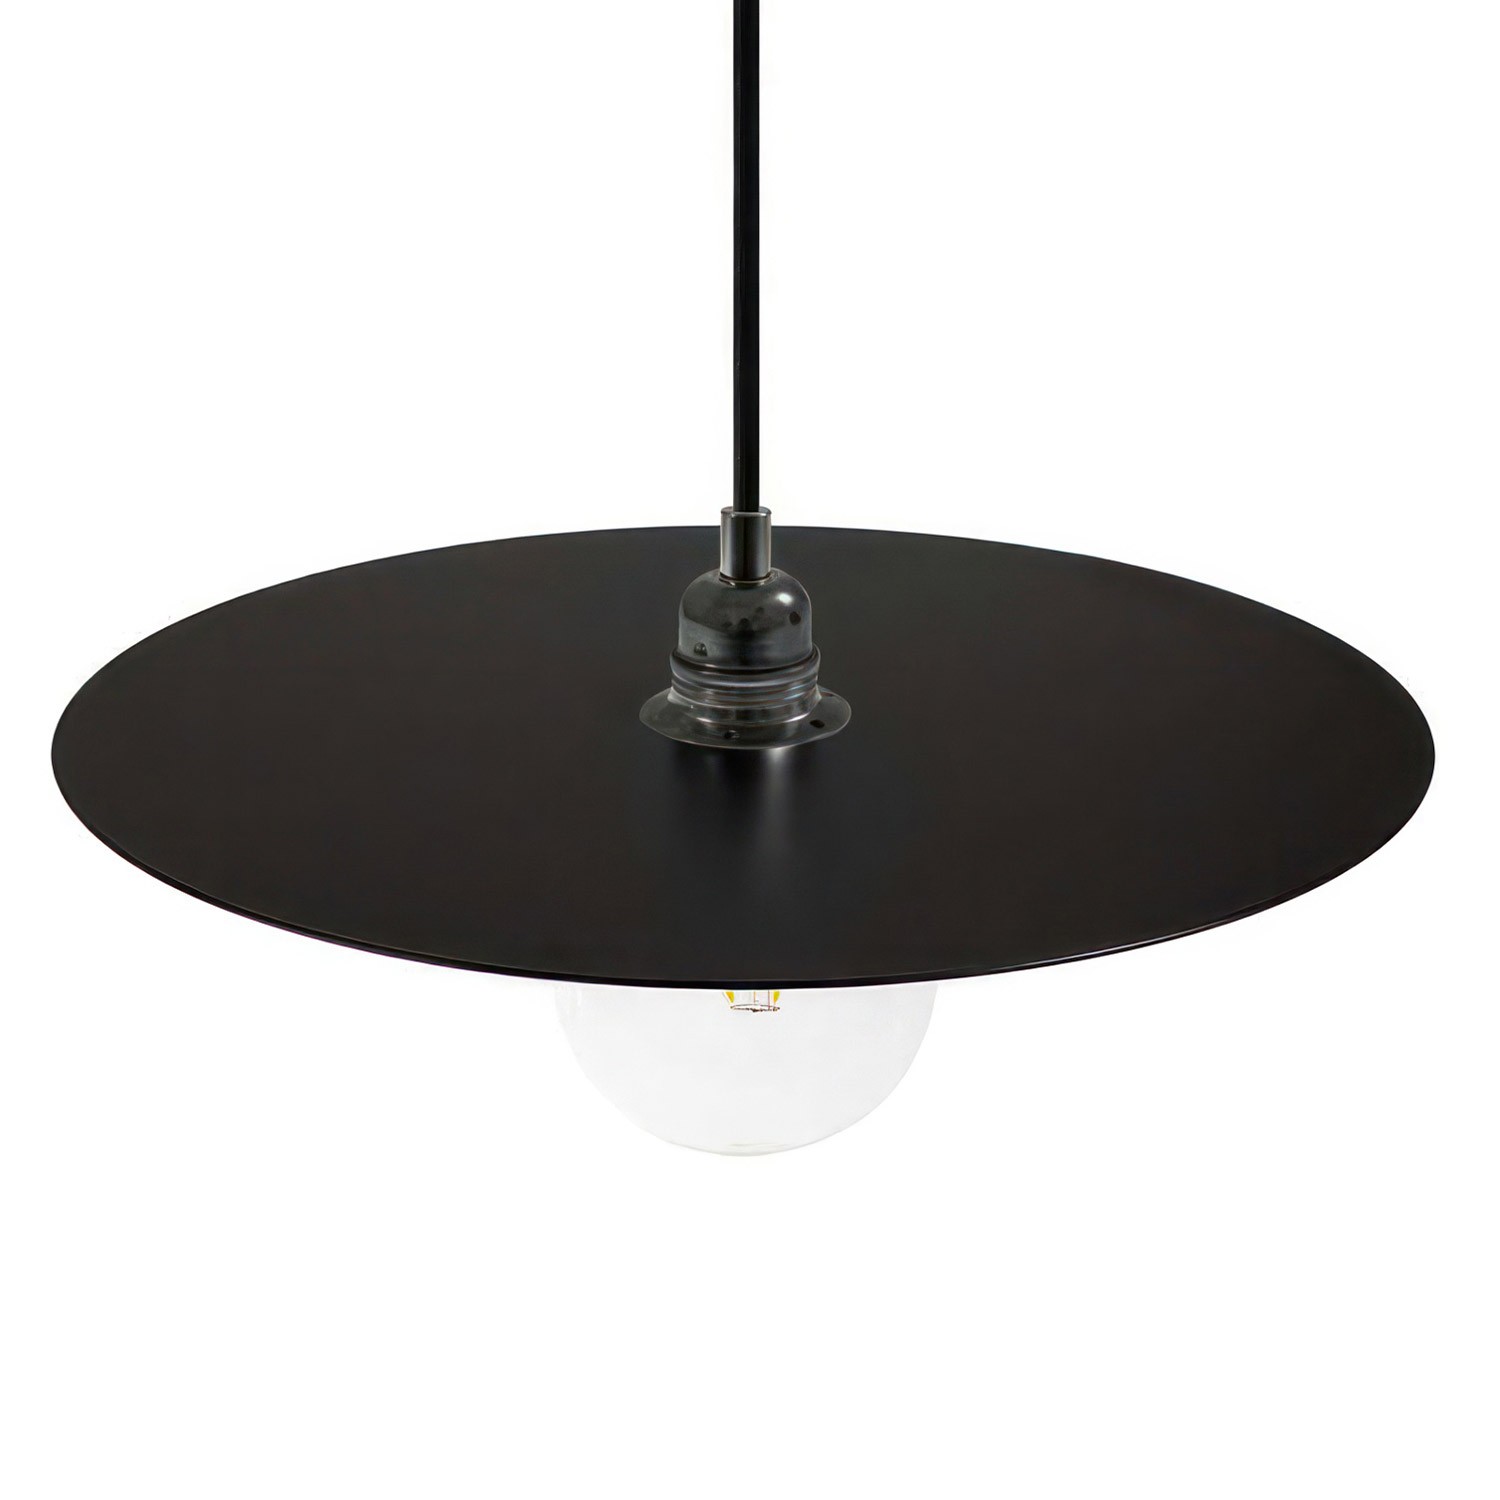 Pendant lamp with textile cable, oversized Ellepi lampshade and metal details - Made in Italy